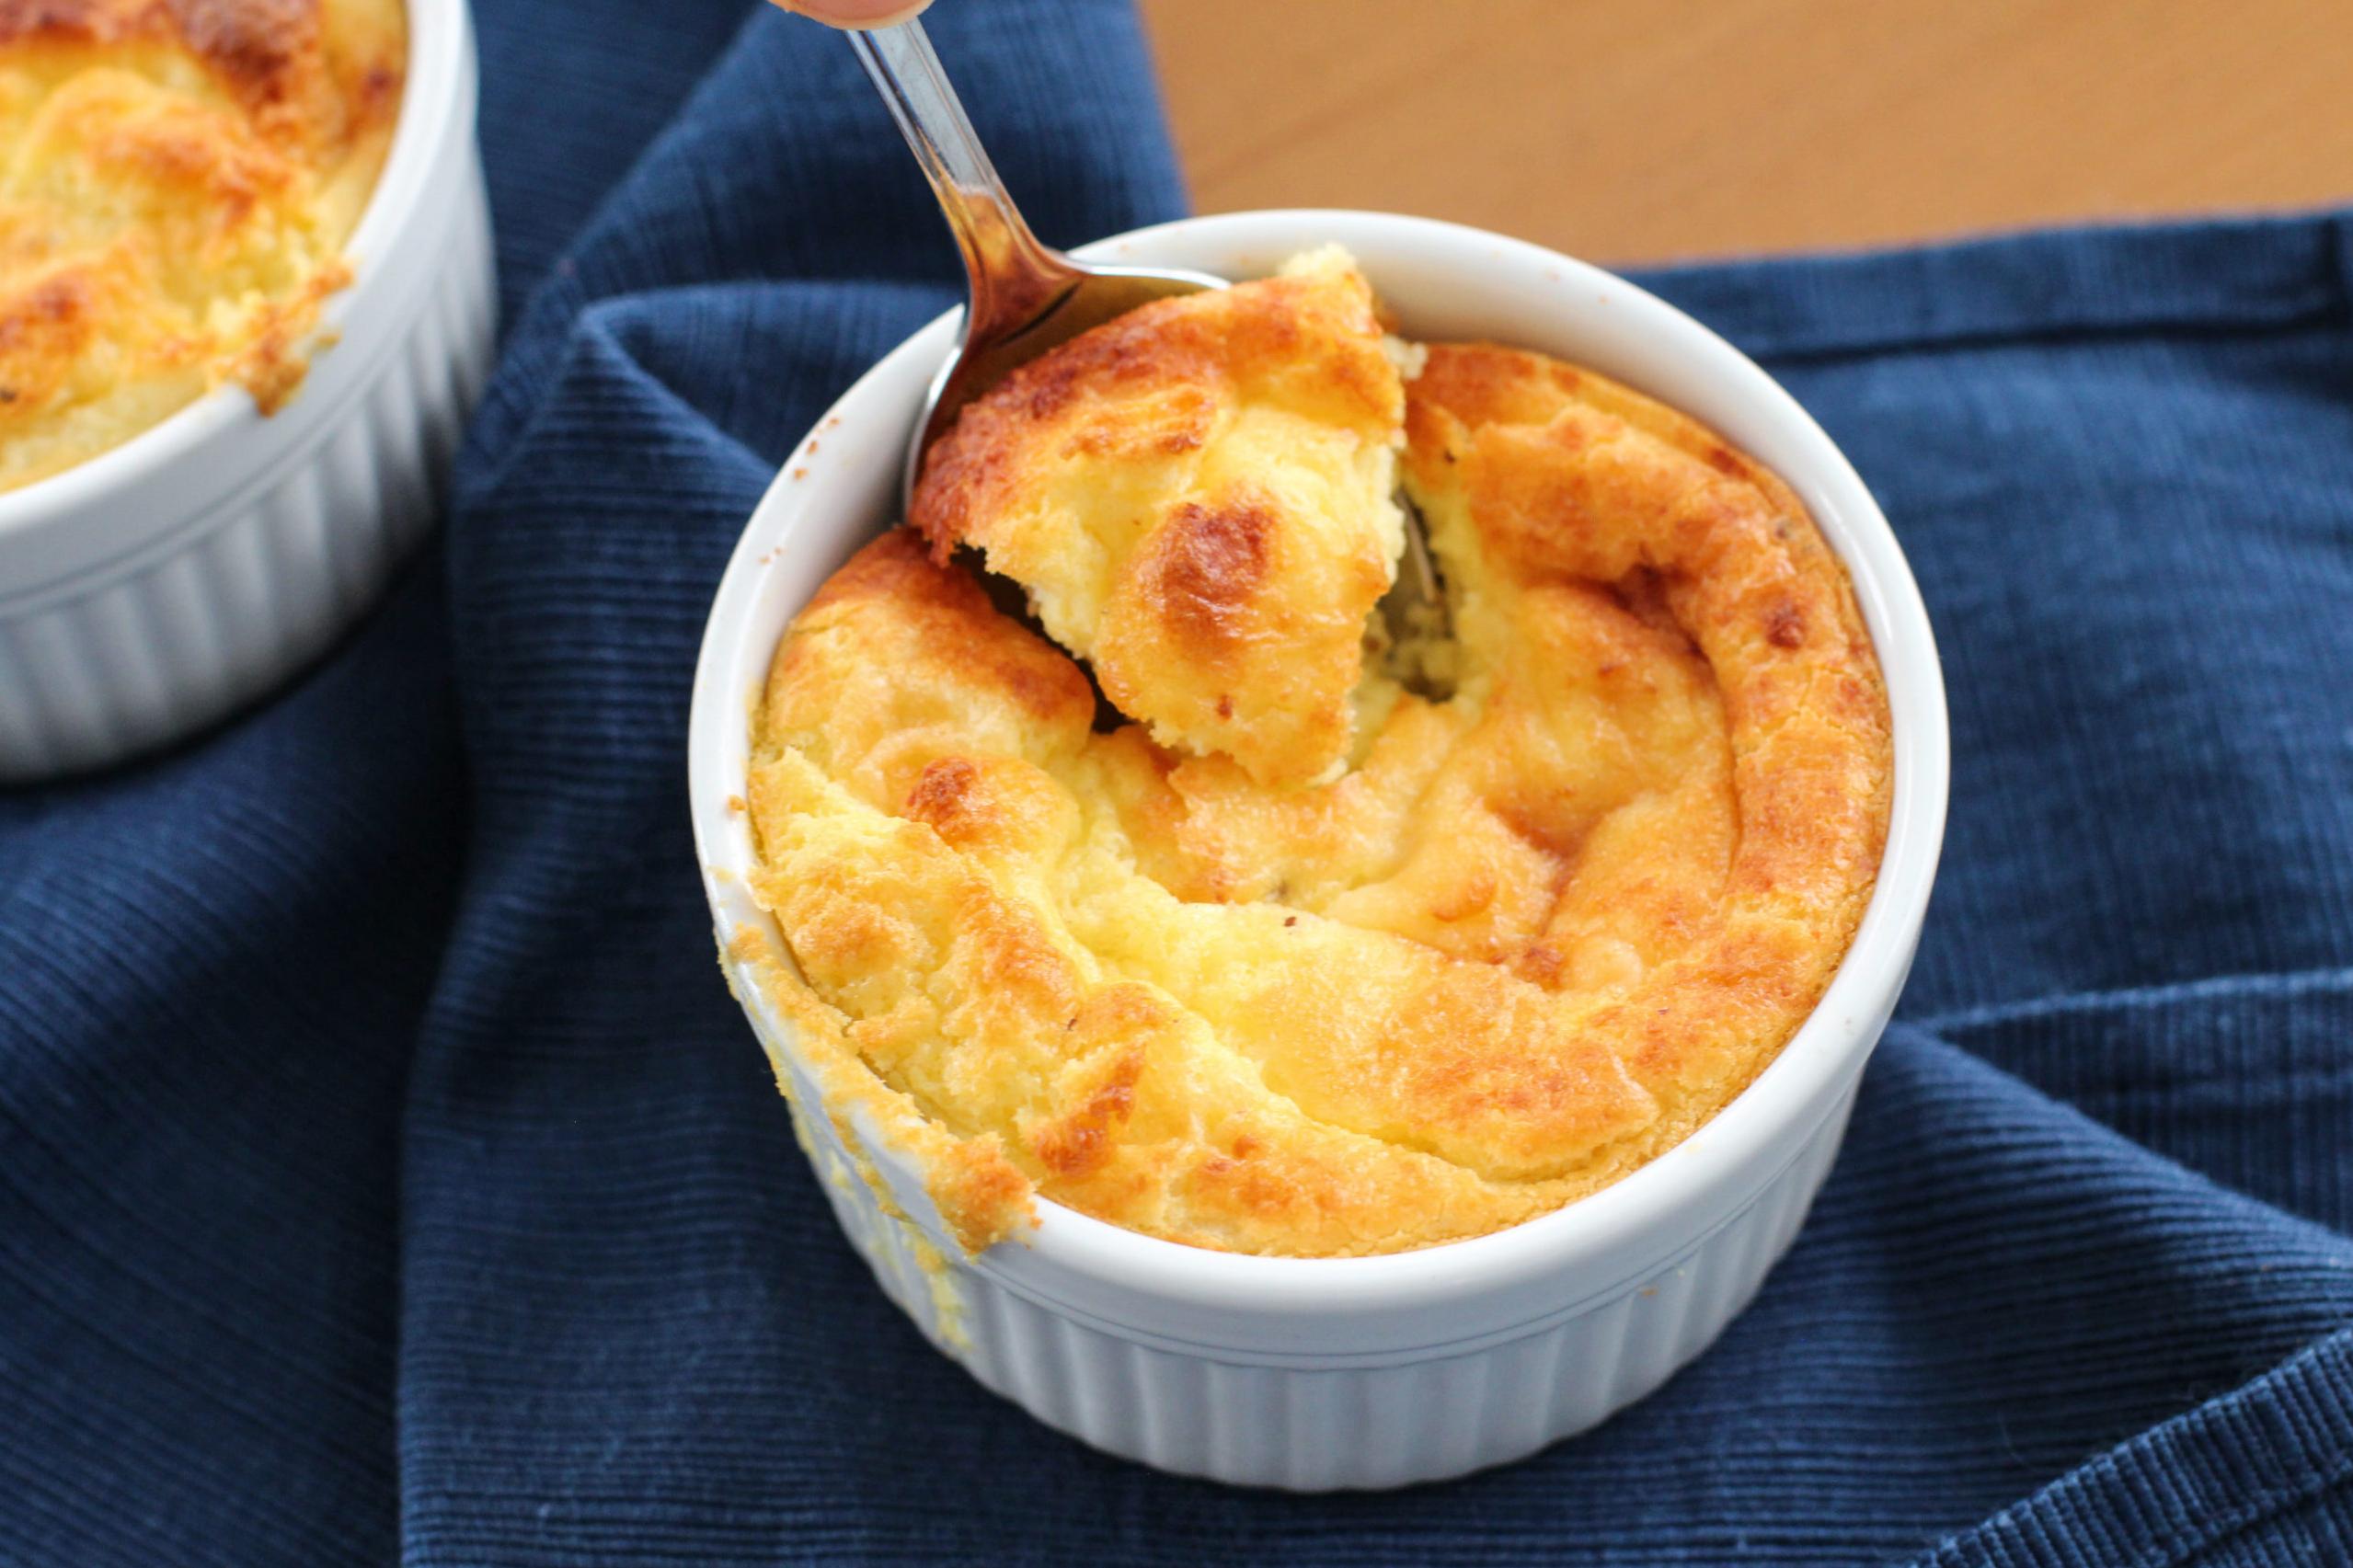  This gluten-free cheese souffle is light, airy, and a decadent way to satisfy your cheese cravings.